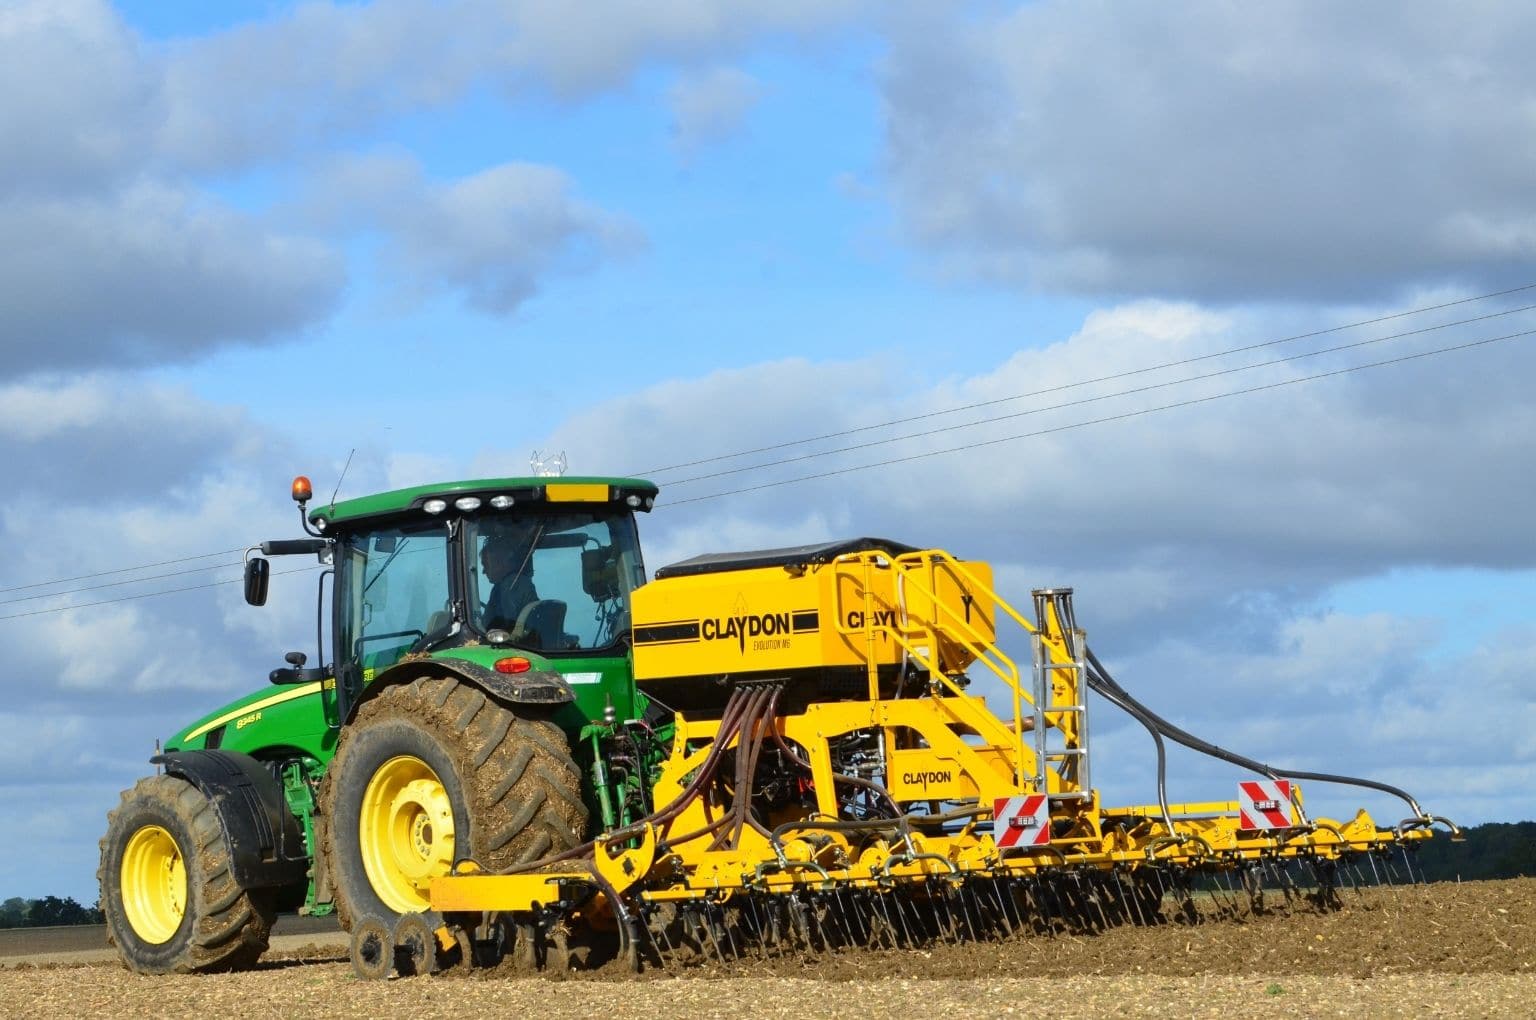 Claydon introduces Evolution M-mounted direct strip drill